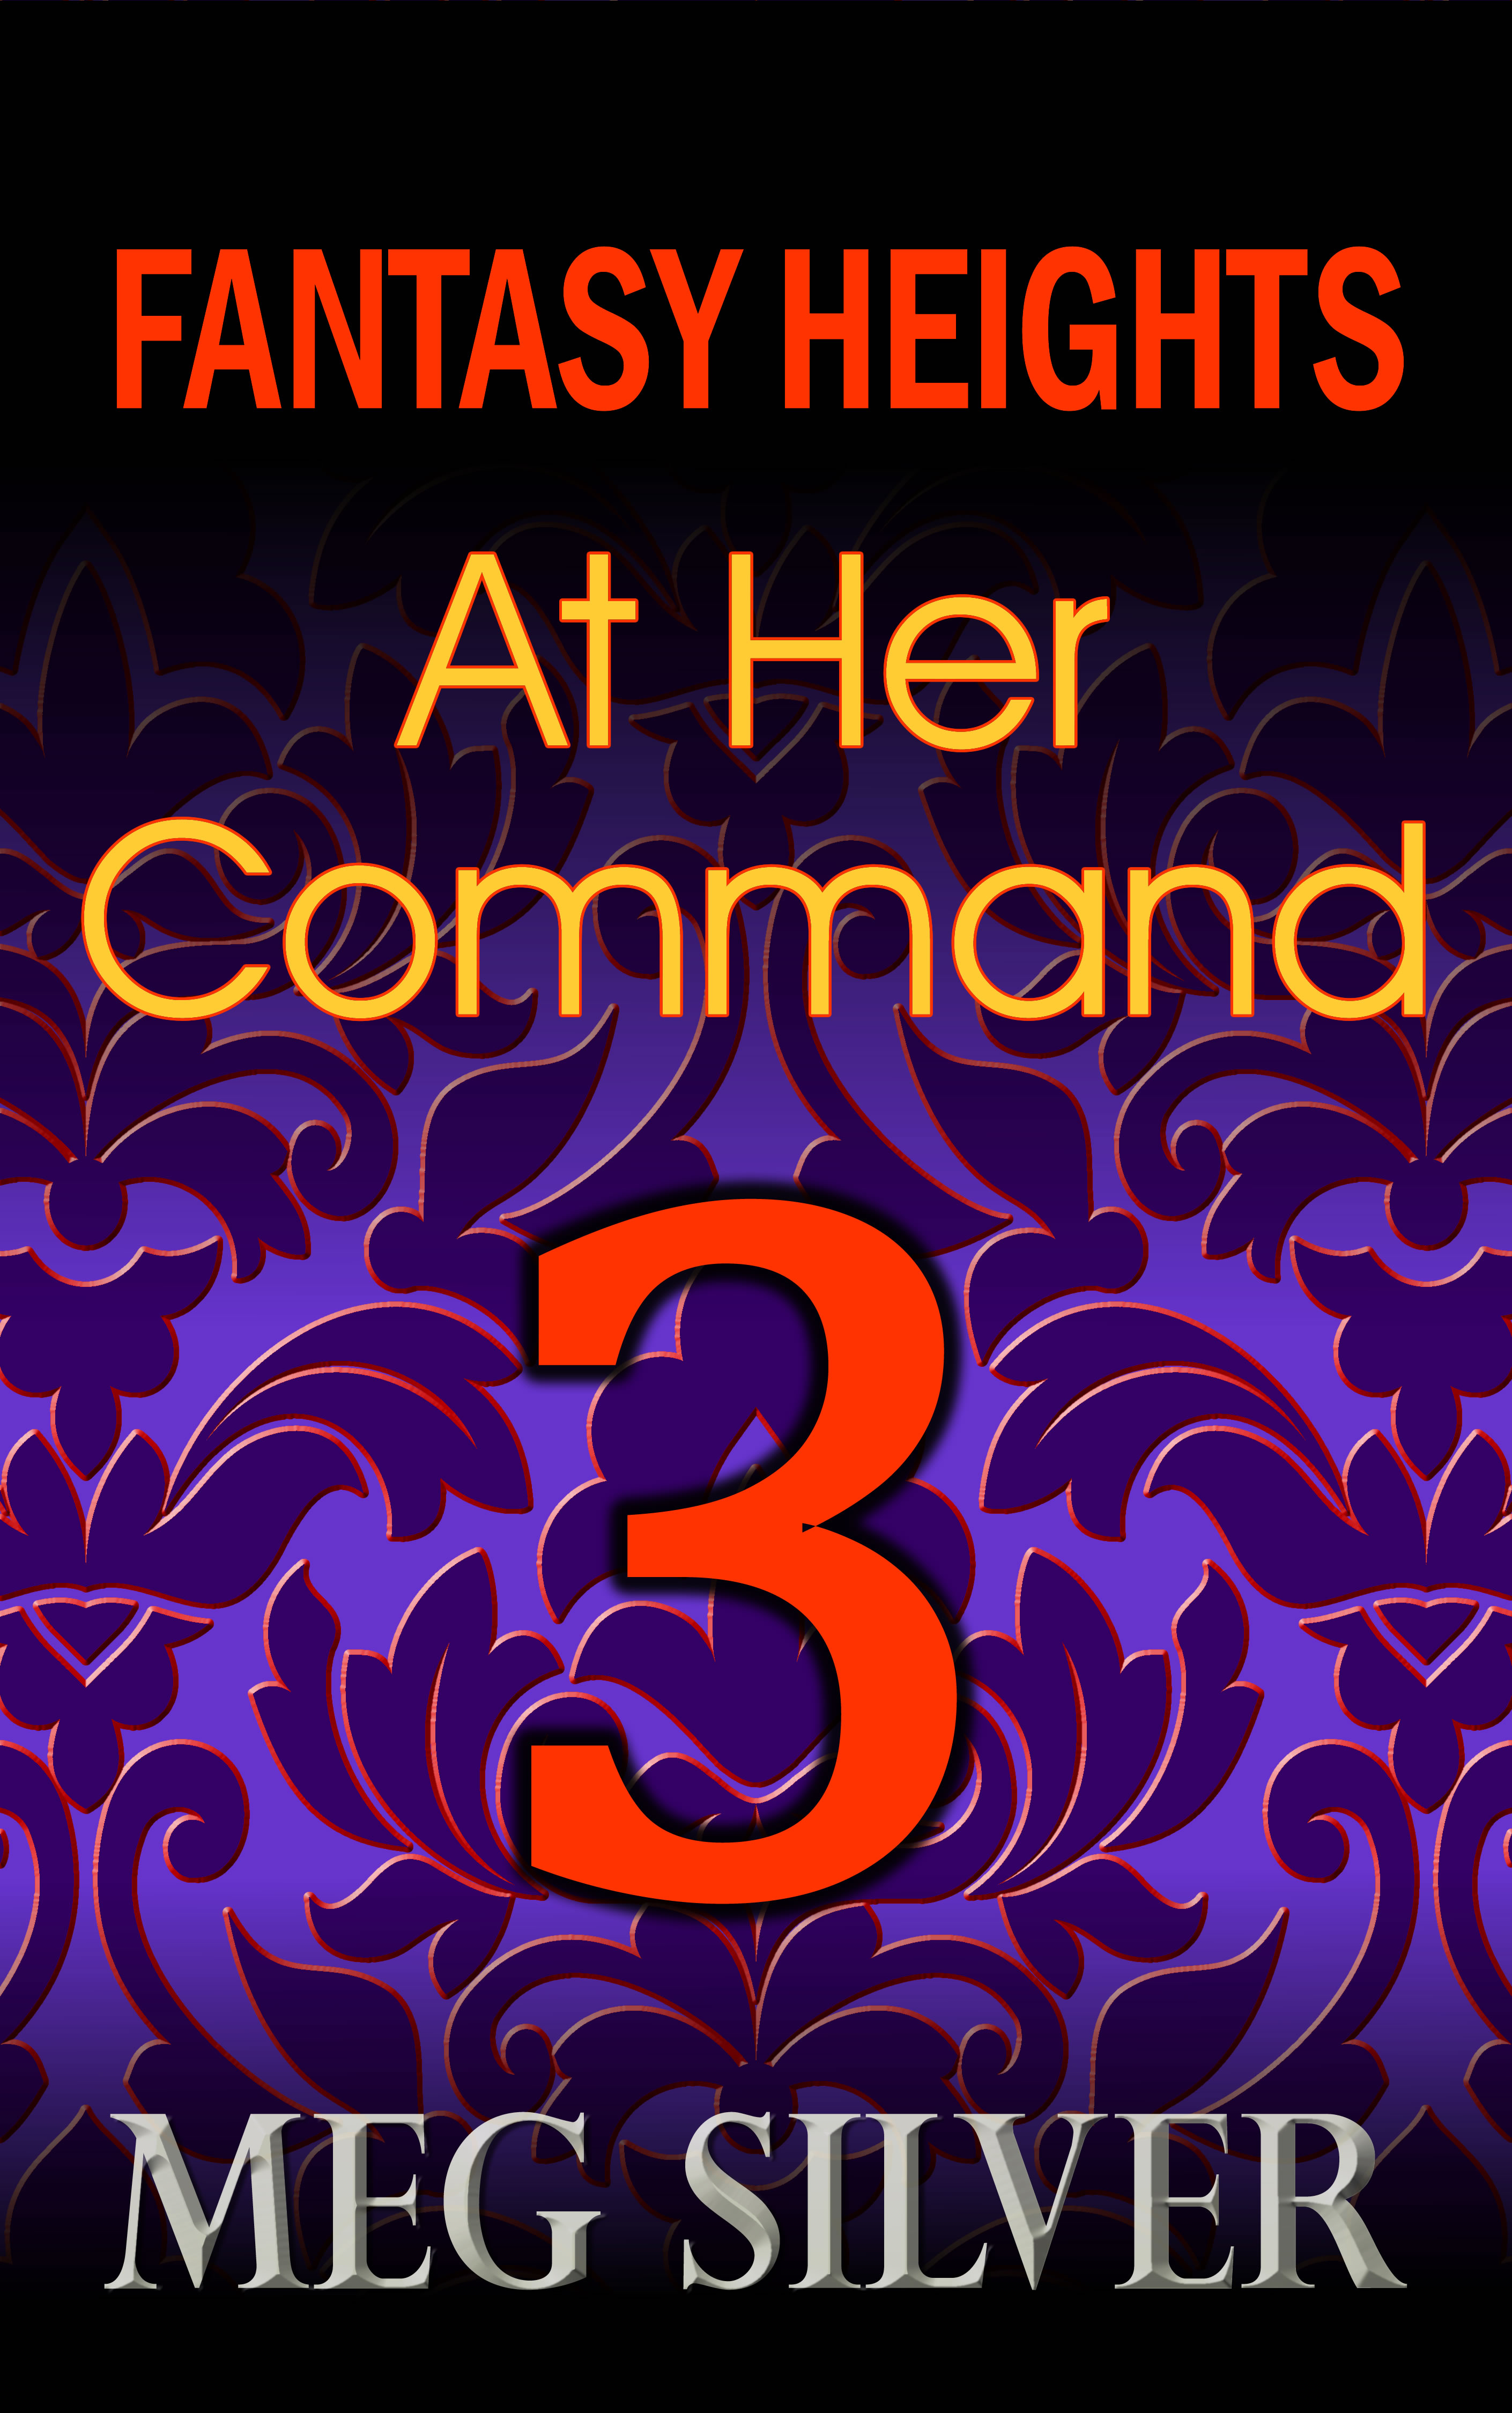 Fantasy Heights Episode 3: At Her Command